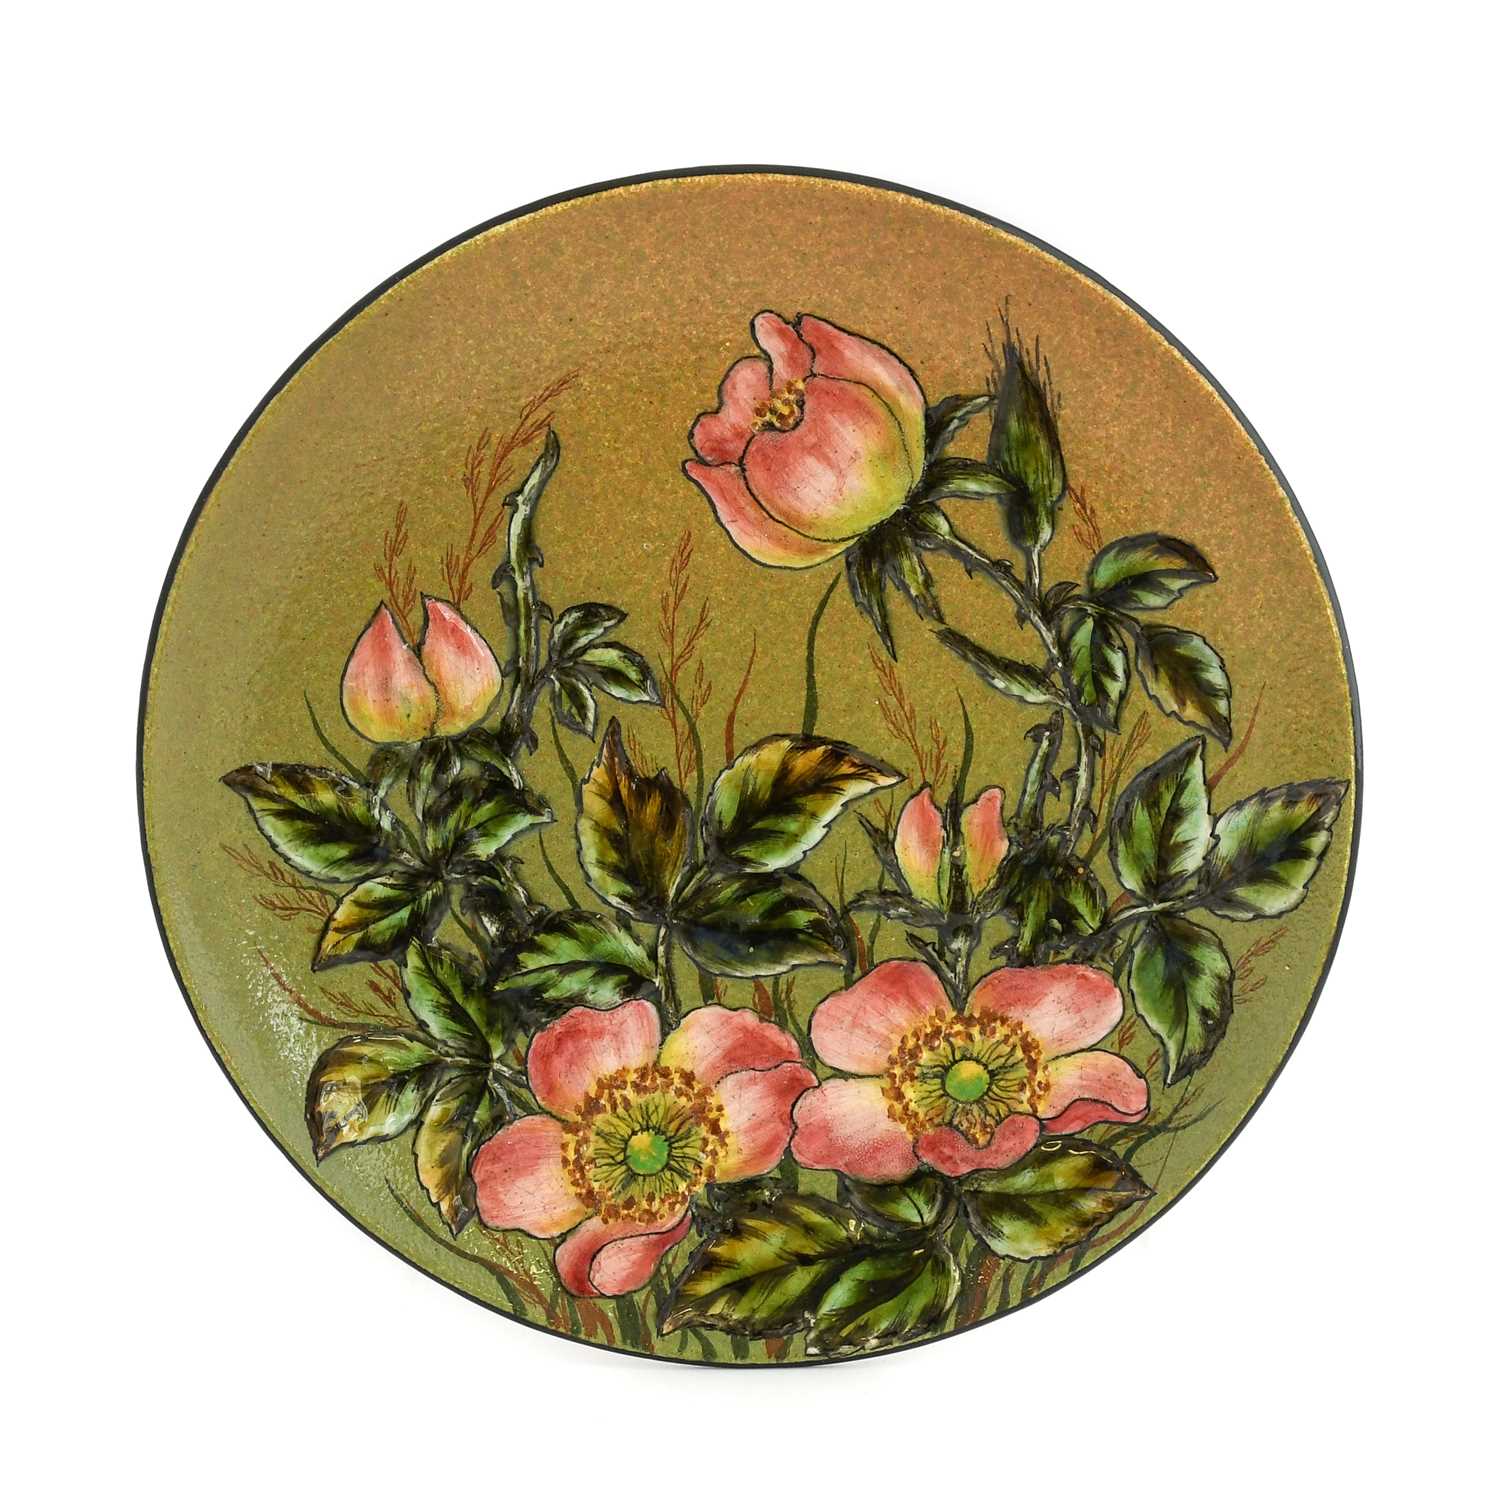 Christopher Dresser (Scottish, 1834-1904) for Linthorpe Pottery: A Dish, painted with fushsias, - Image 7 of 22